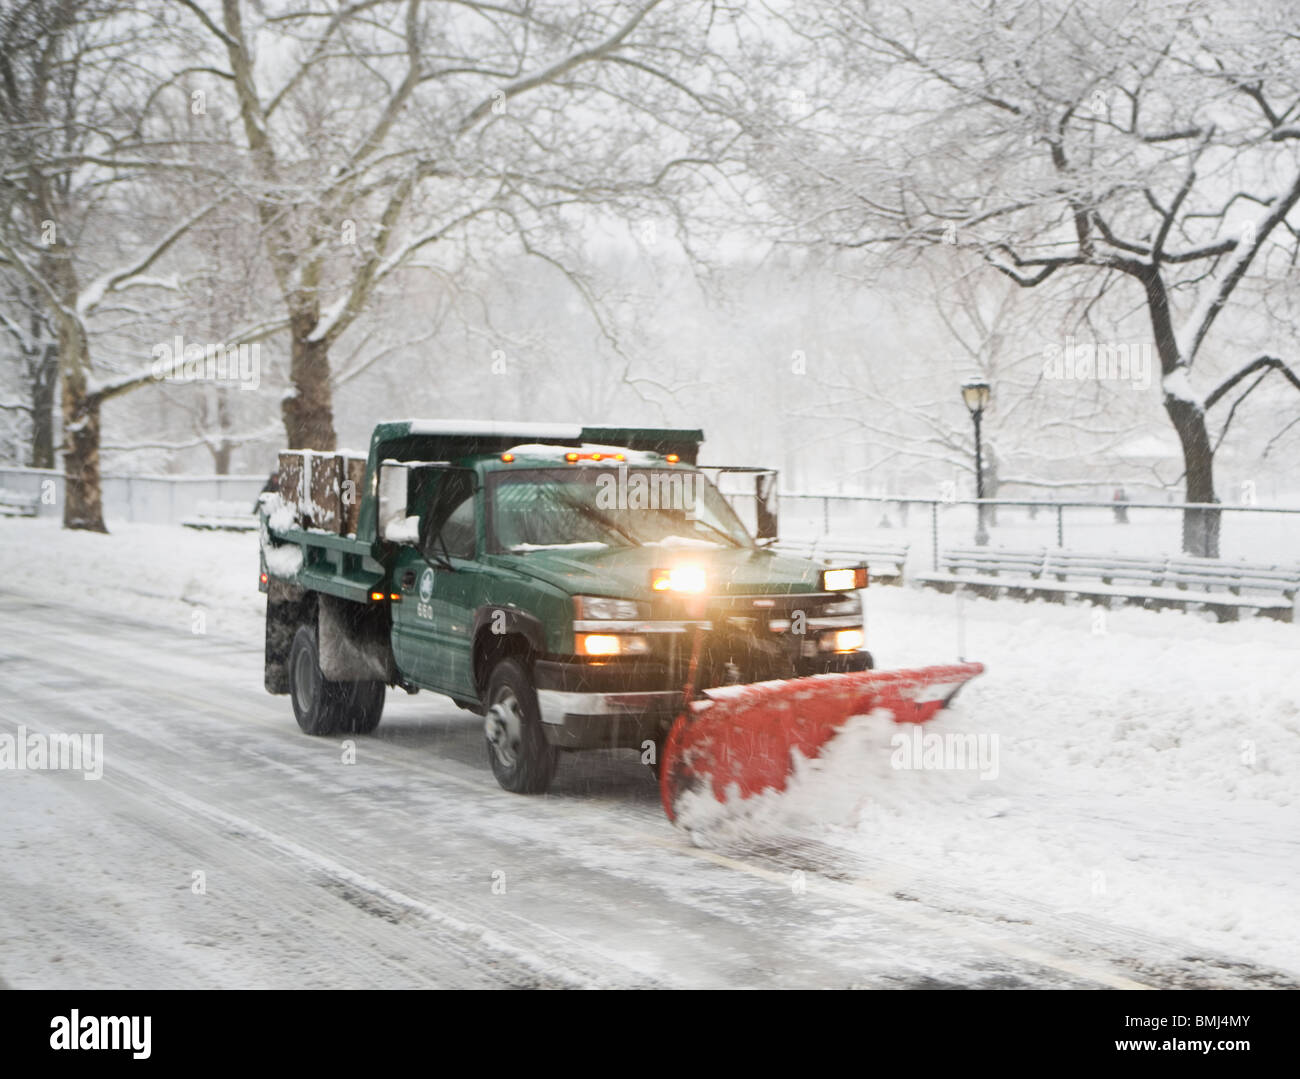 Snow plow truck clearing road Stock Photo